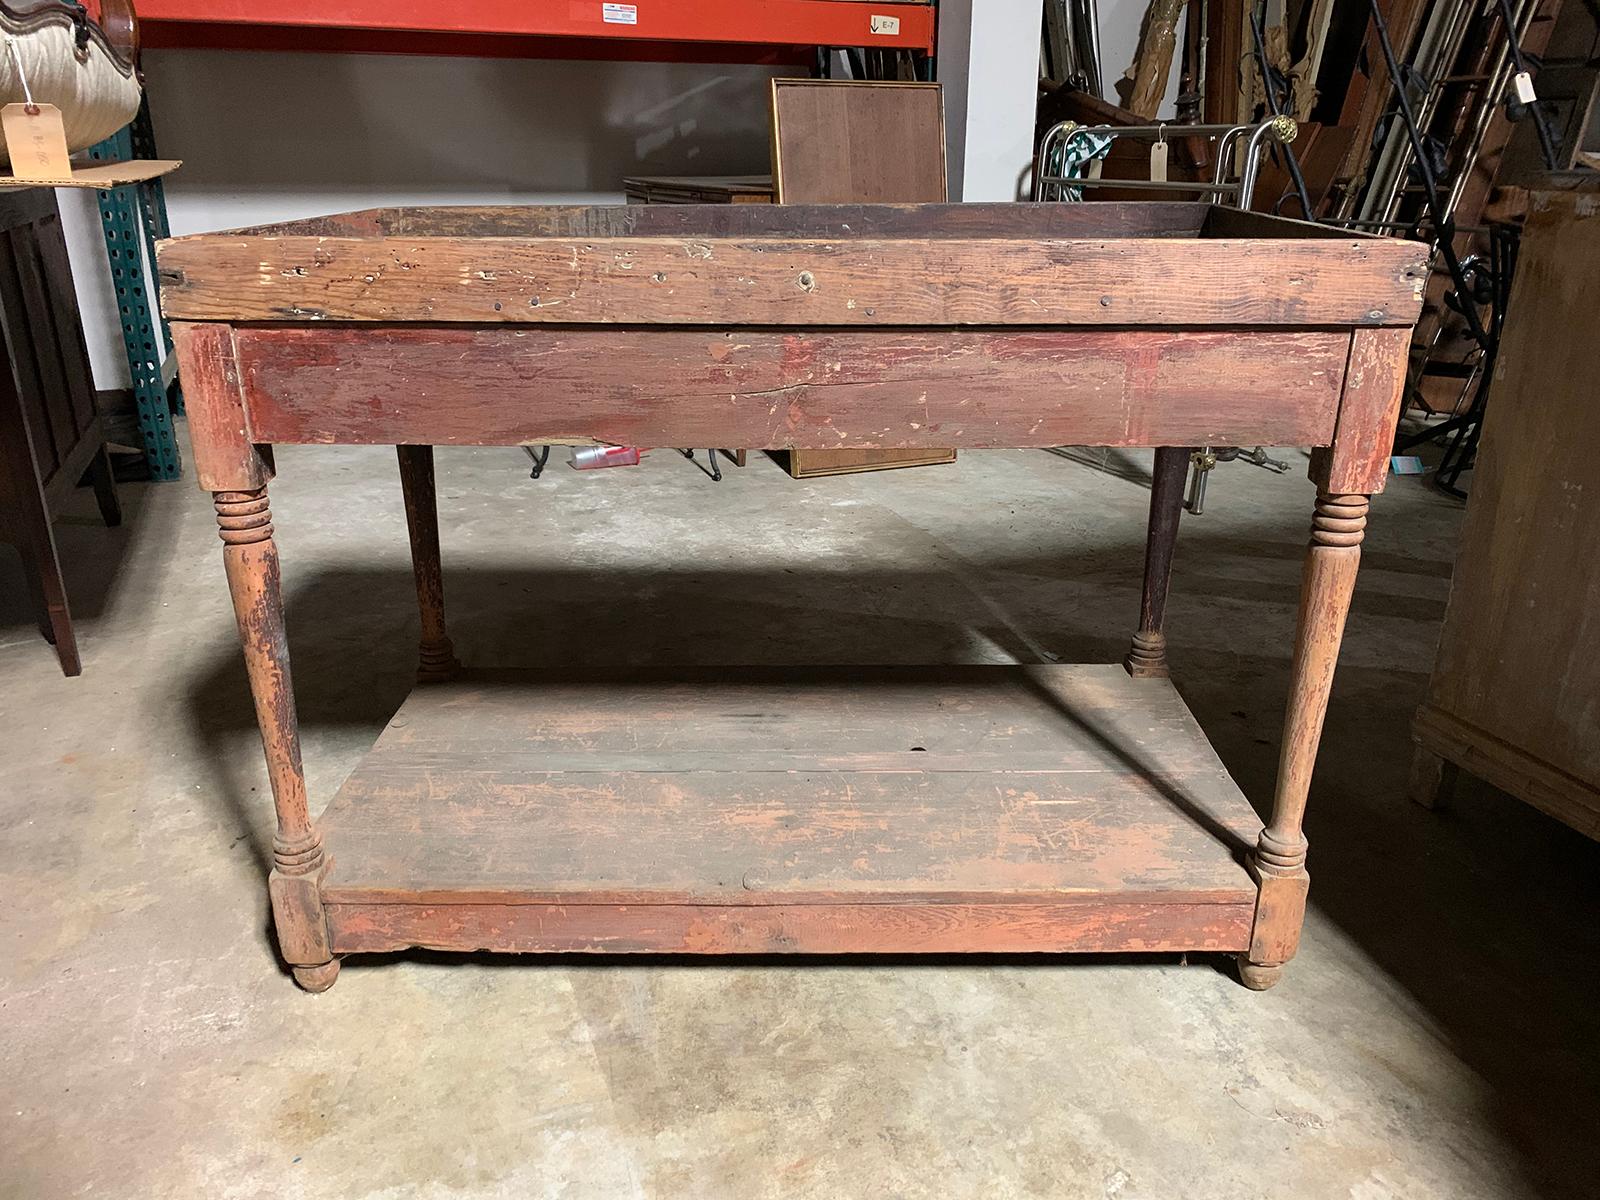 19th-early 20th century Primitive American painted rustic work table, original finish.